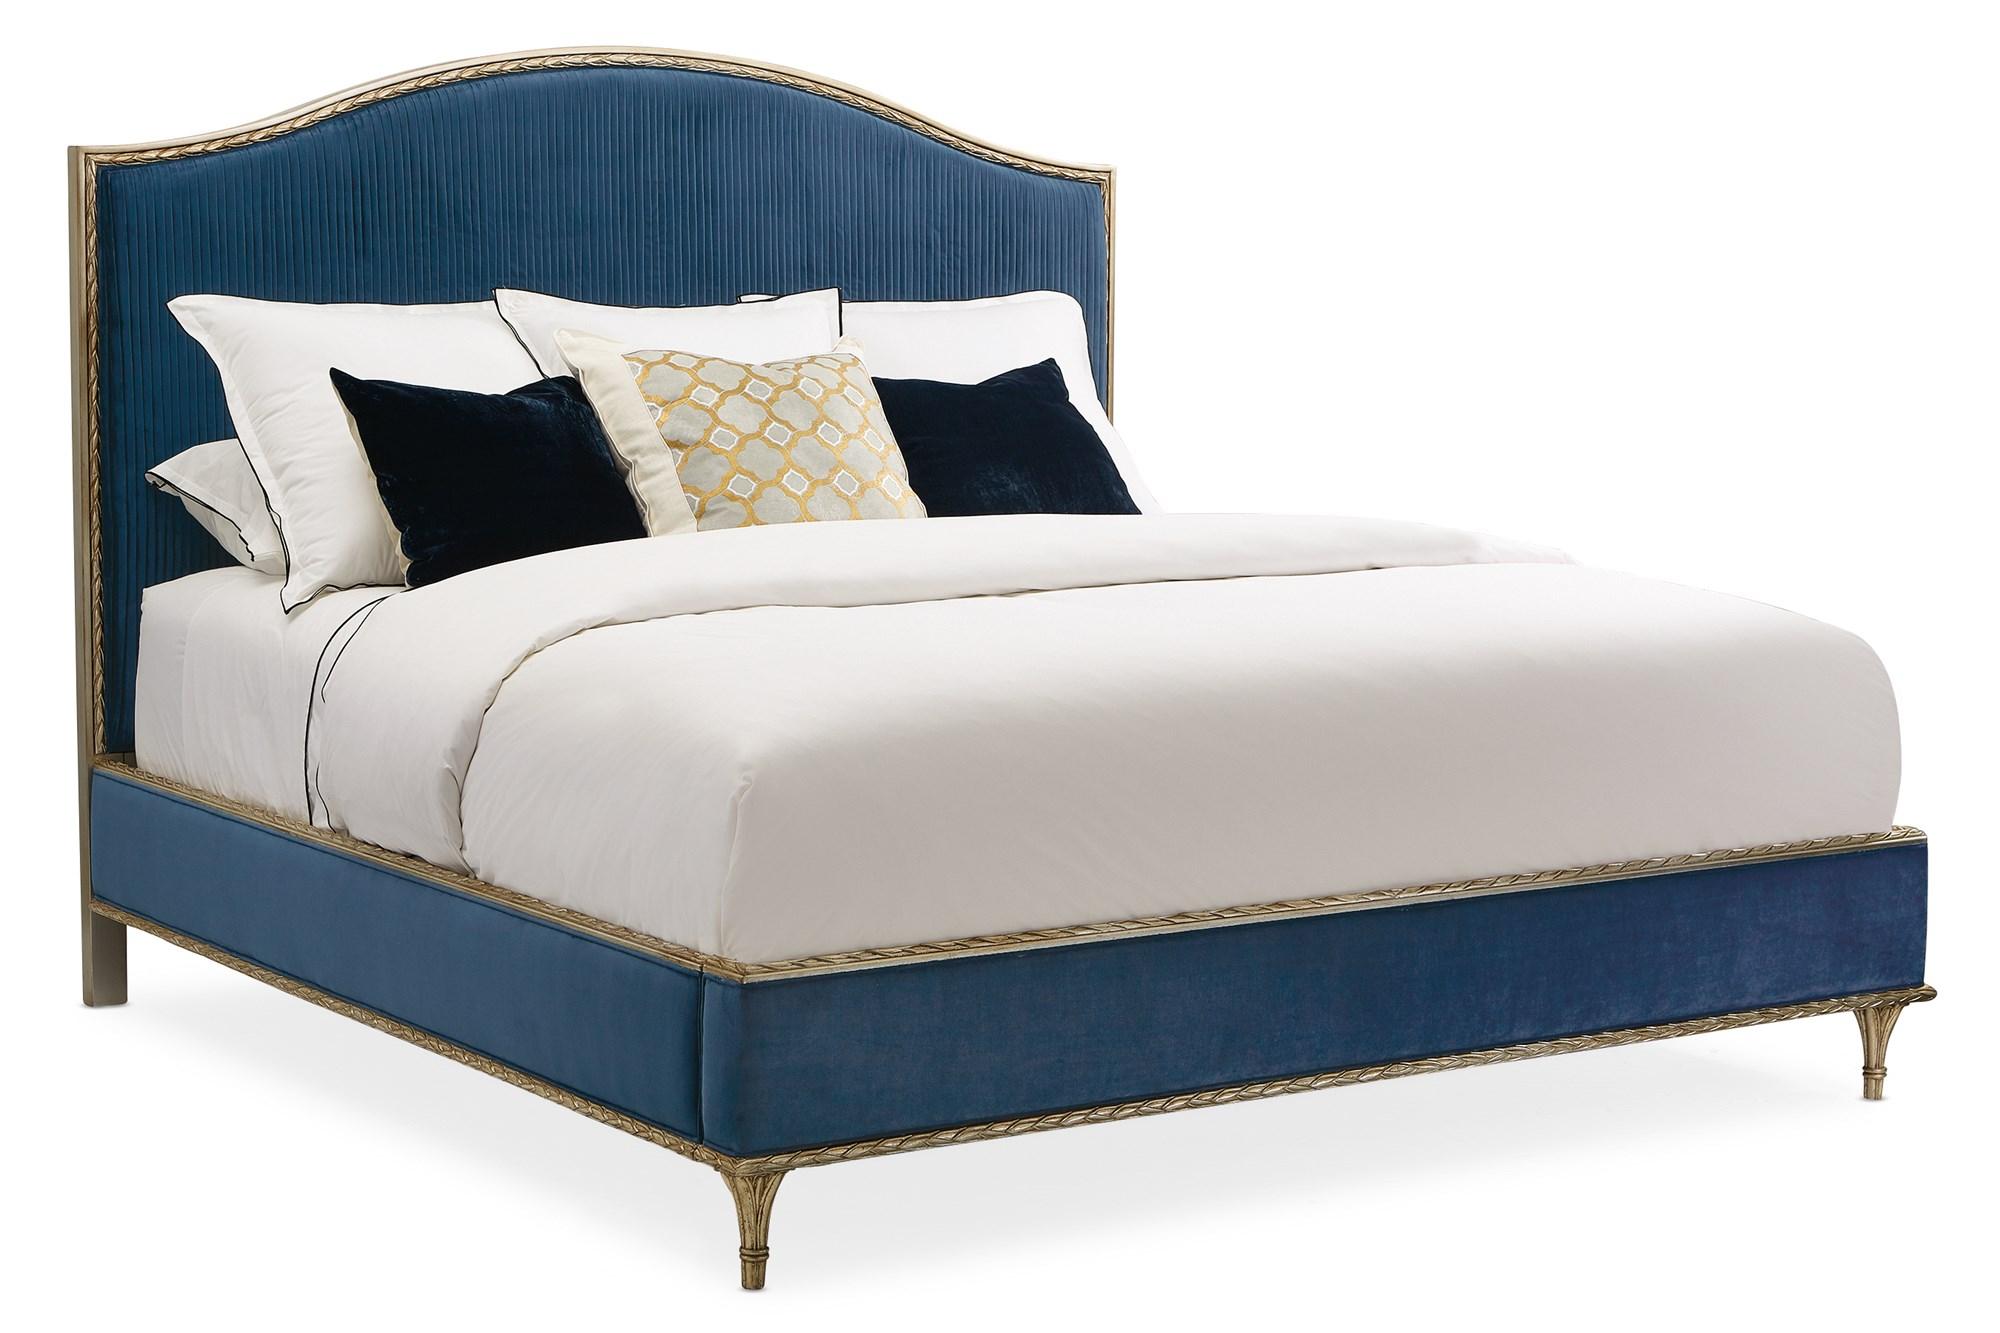 Traditional Platform Bed FONTAINEBLEAU C063-419-122 in Gold, Blue Fabric